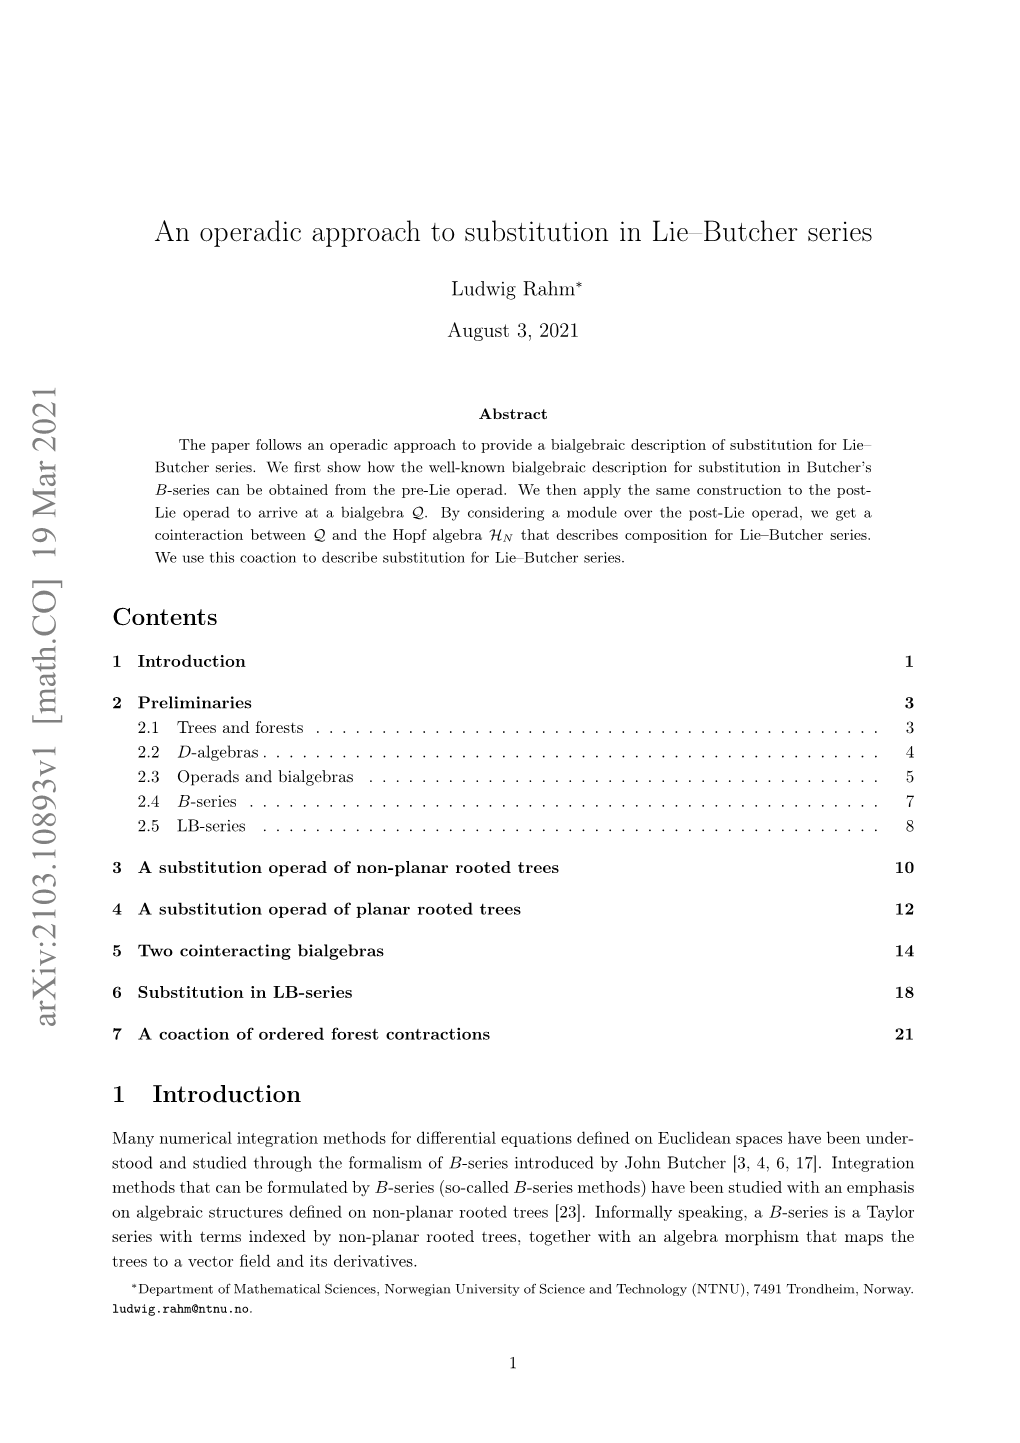 An Operadic Approach to Substitution in Lie–Butcher Series